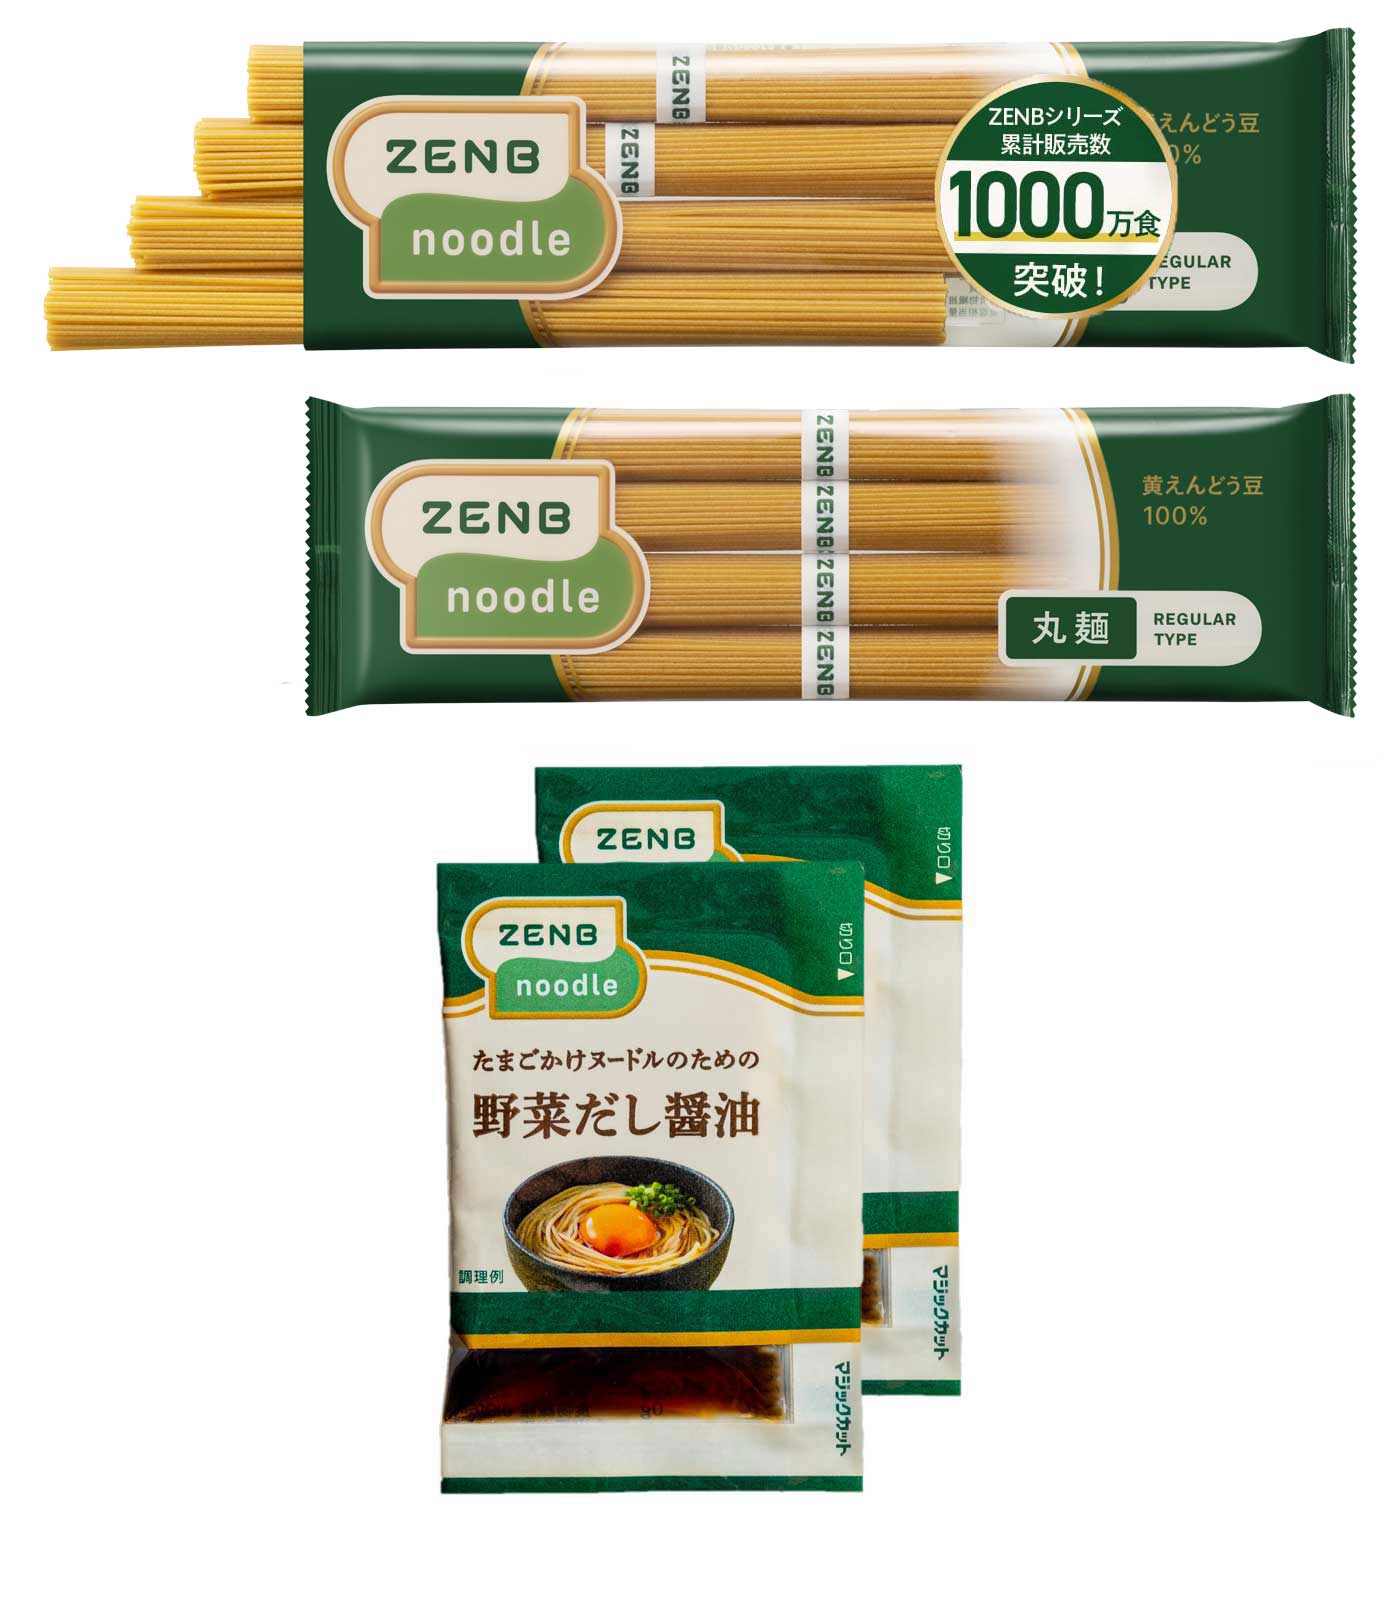 ZENBzemb nude ru circle noodle 8 meal + Tama ... nude ru therefore. vegetable soup soy sauce 2 sack free shipping l plan to base animal . feedstocks un- use protein cellulose 